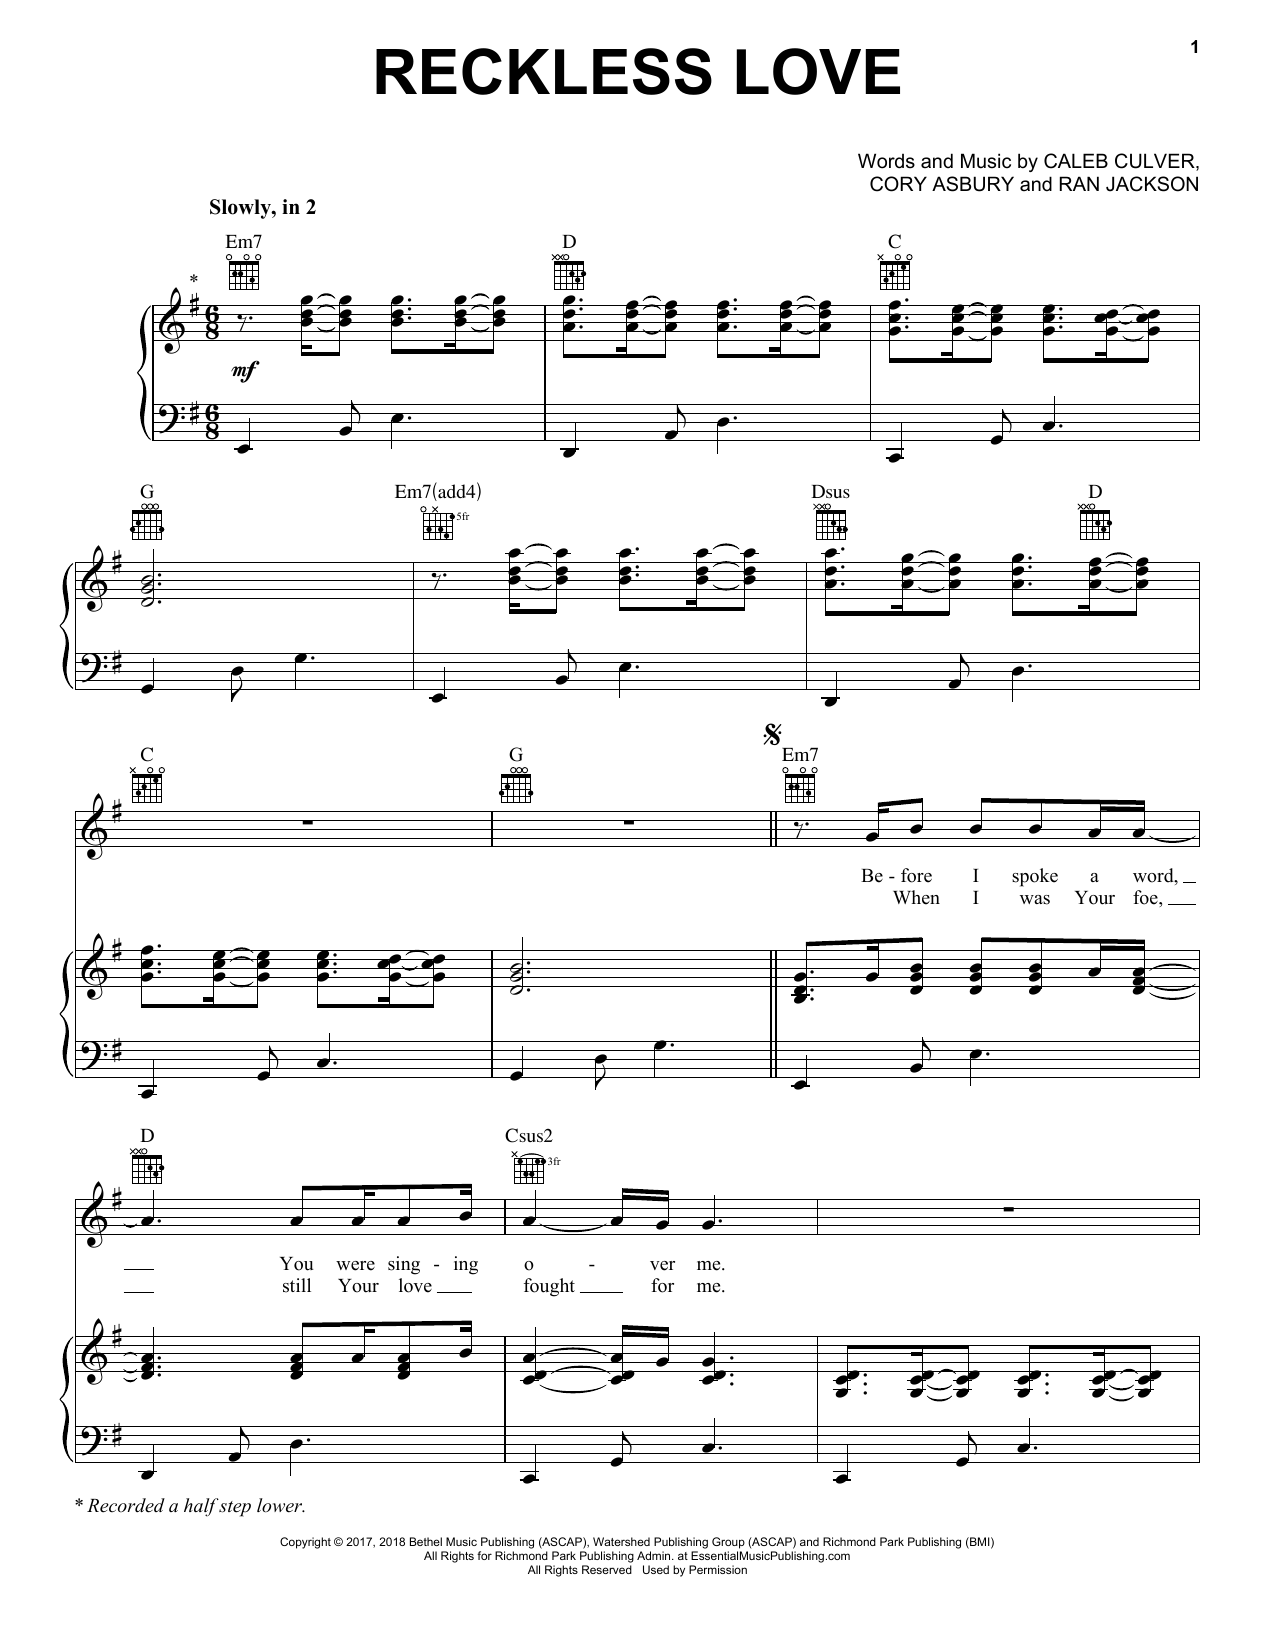 Cory Asbury Reckless Love sheet music notes and chords. Download Printable PDF.